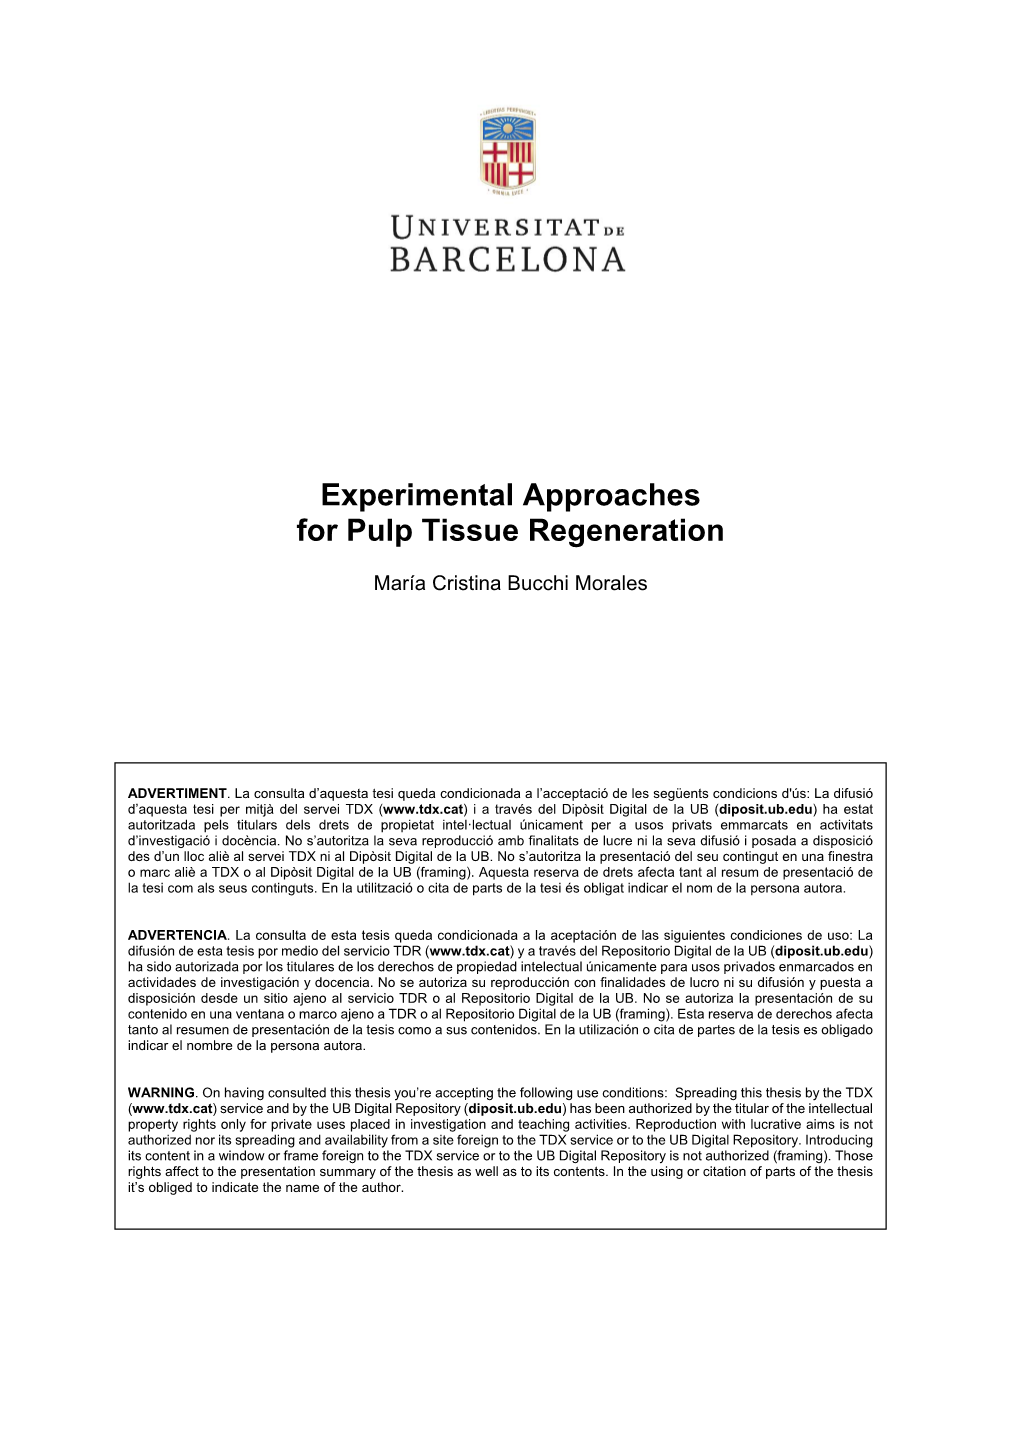 Experimental Approaches for Pulp Tissue Regeneration